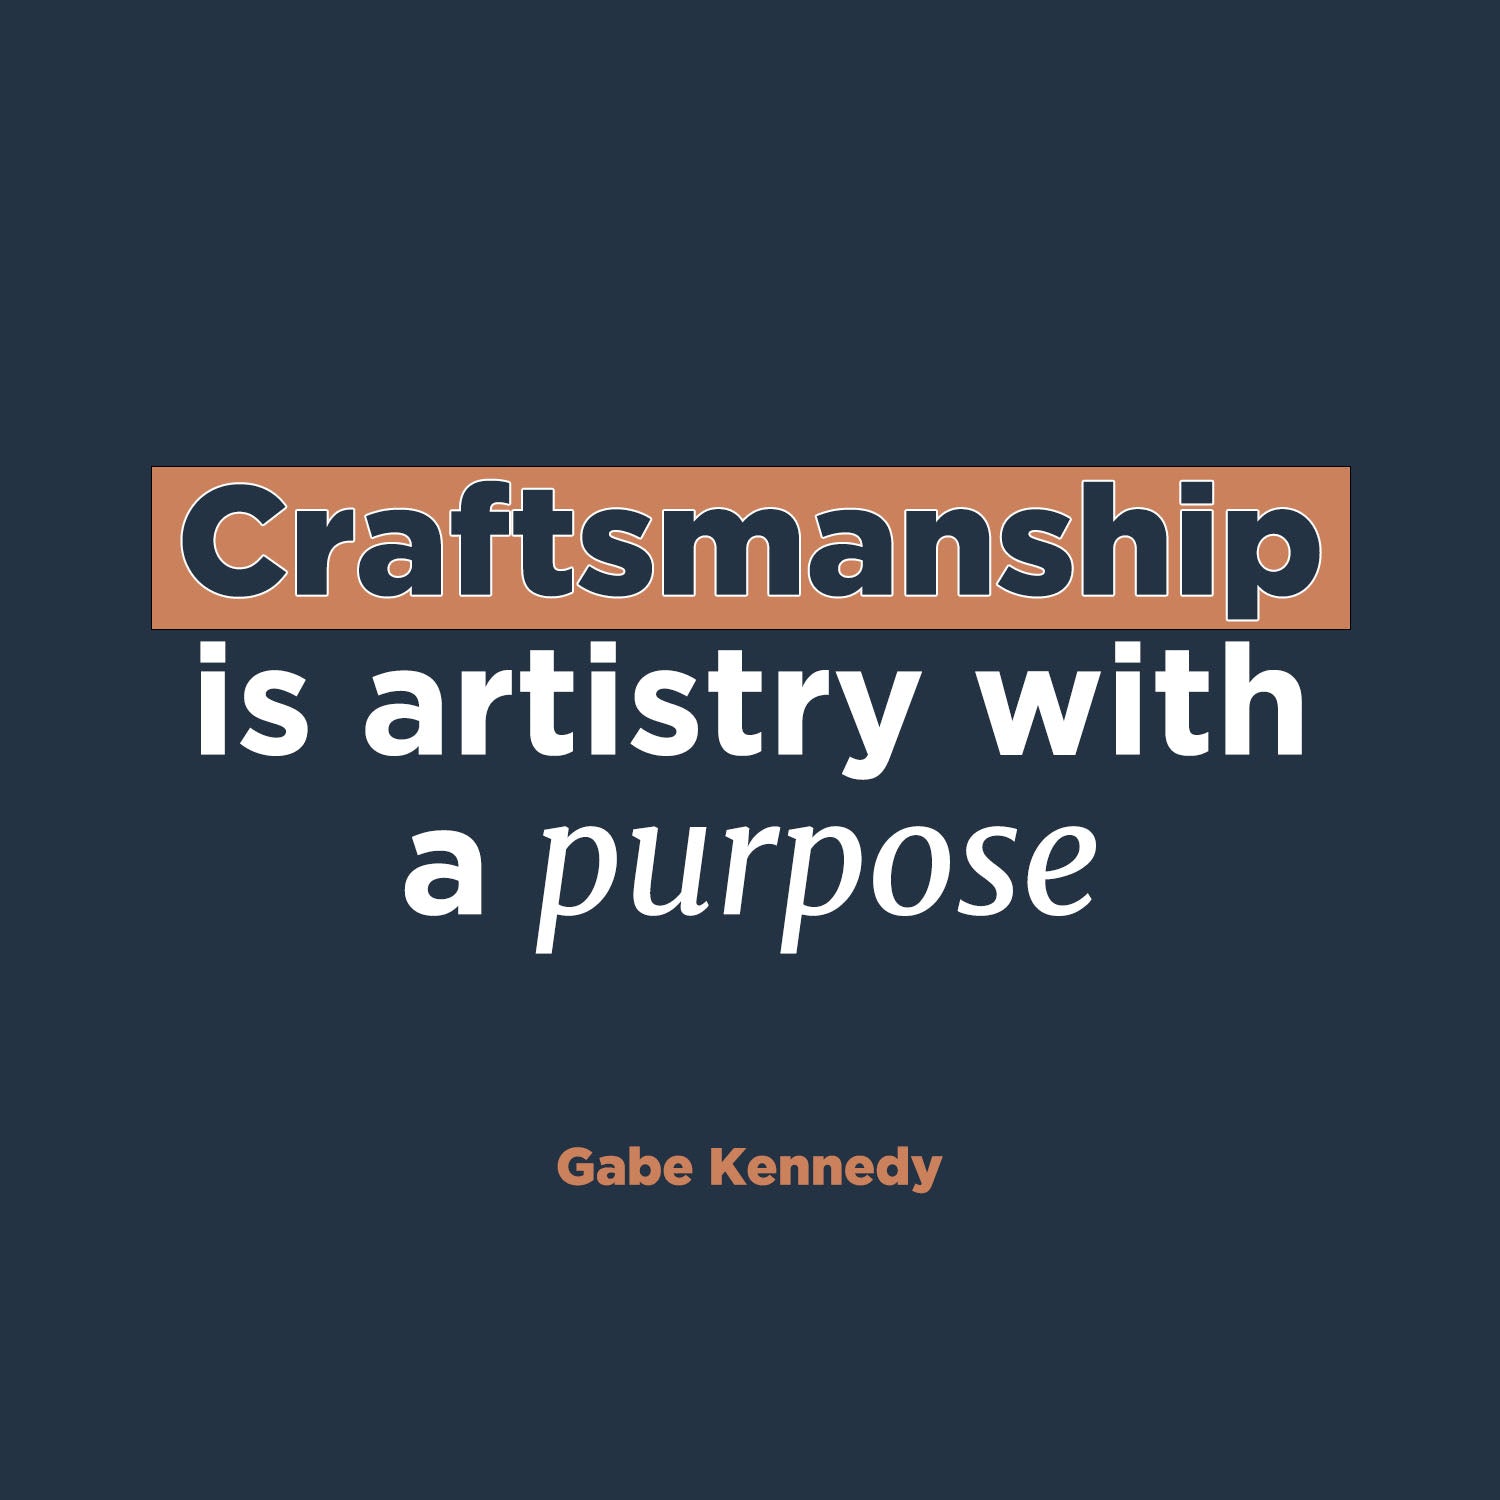 Craftsmanship is artistry with a purpose